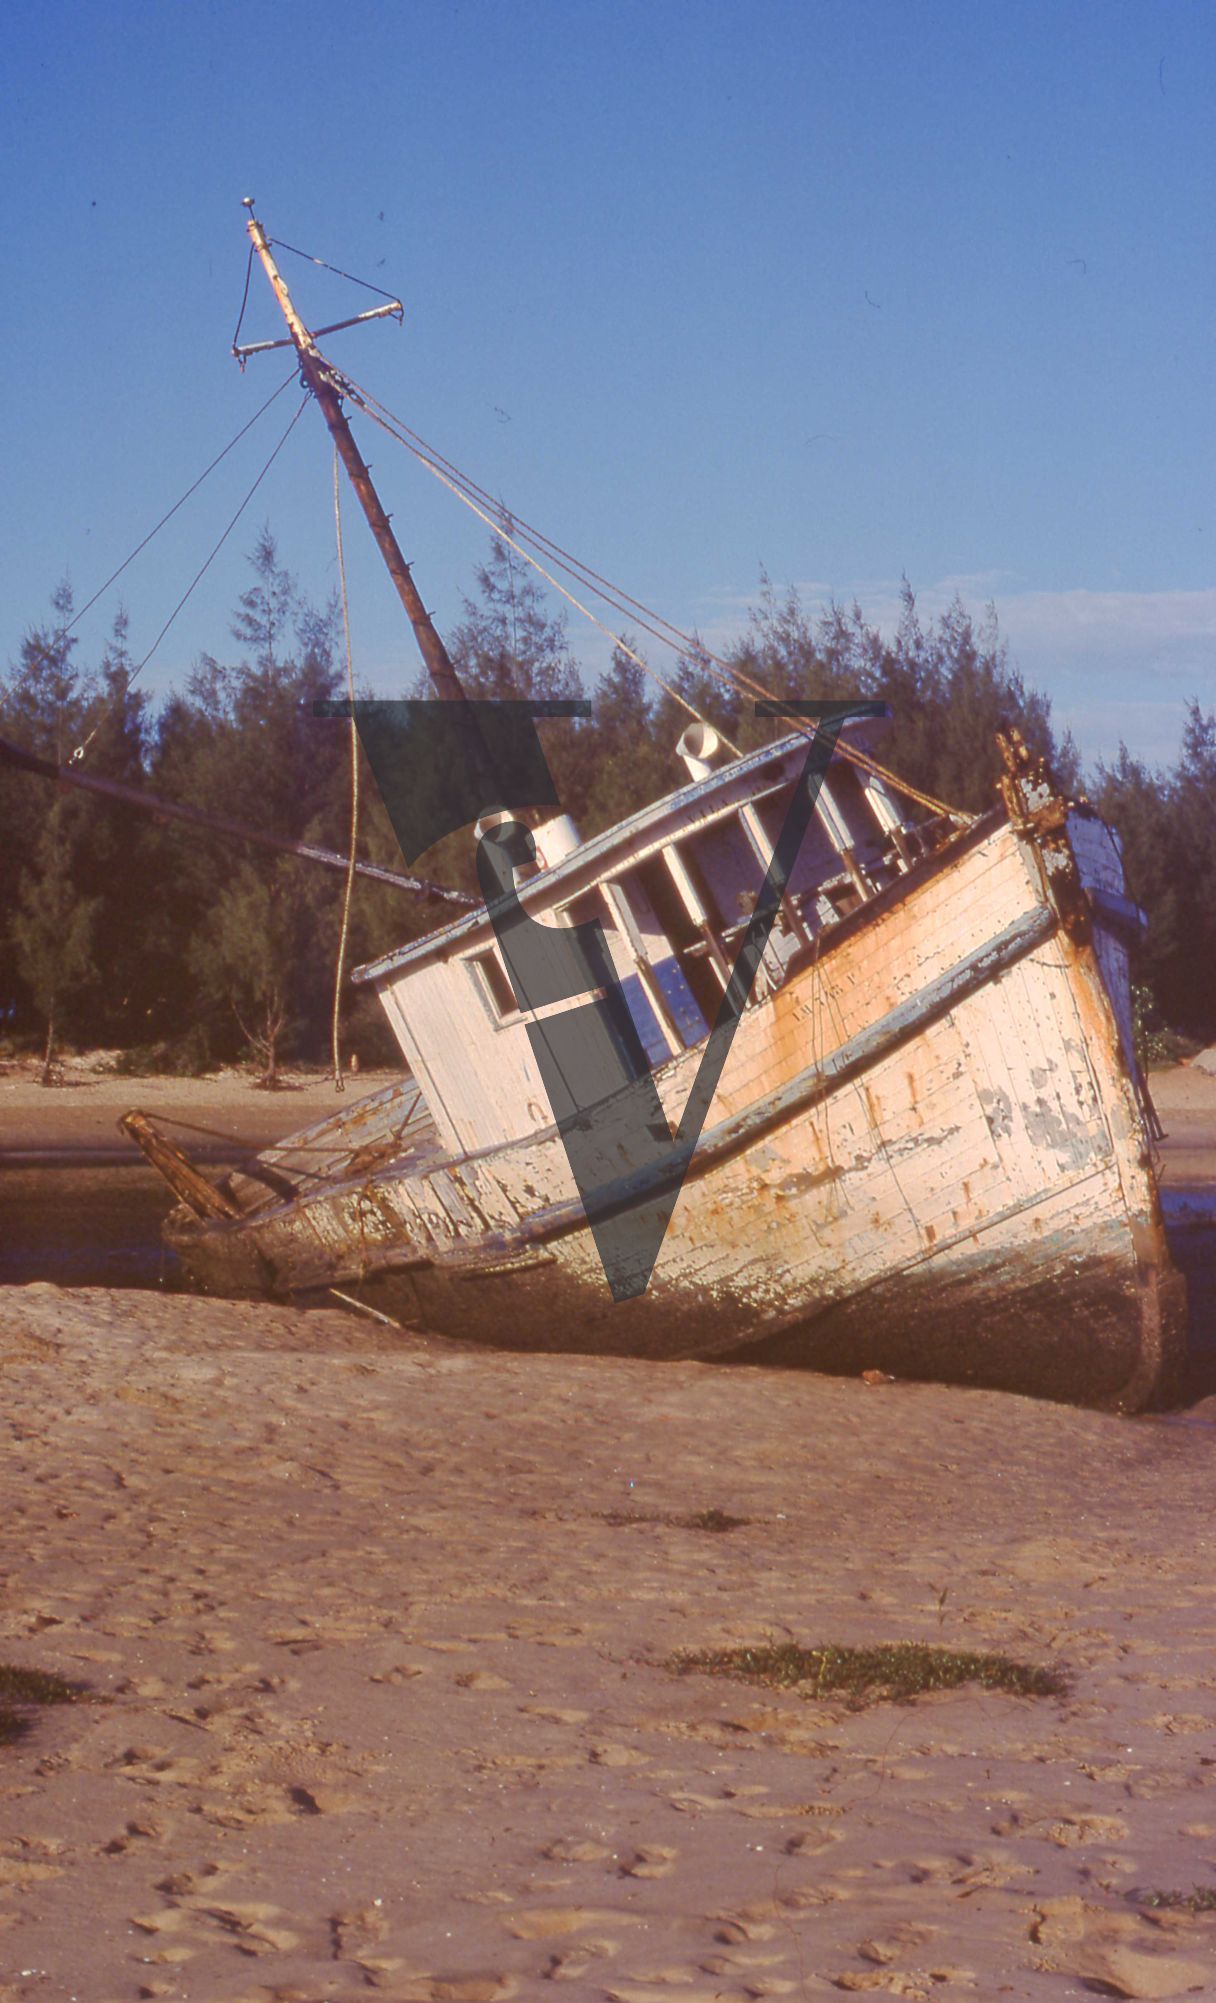 Mozambique, Southern Africa, boat in dry river, portrait.